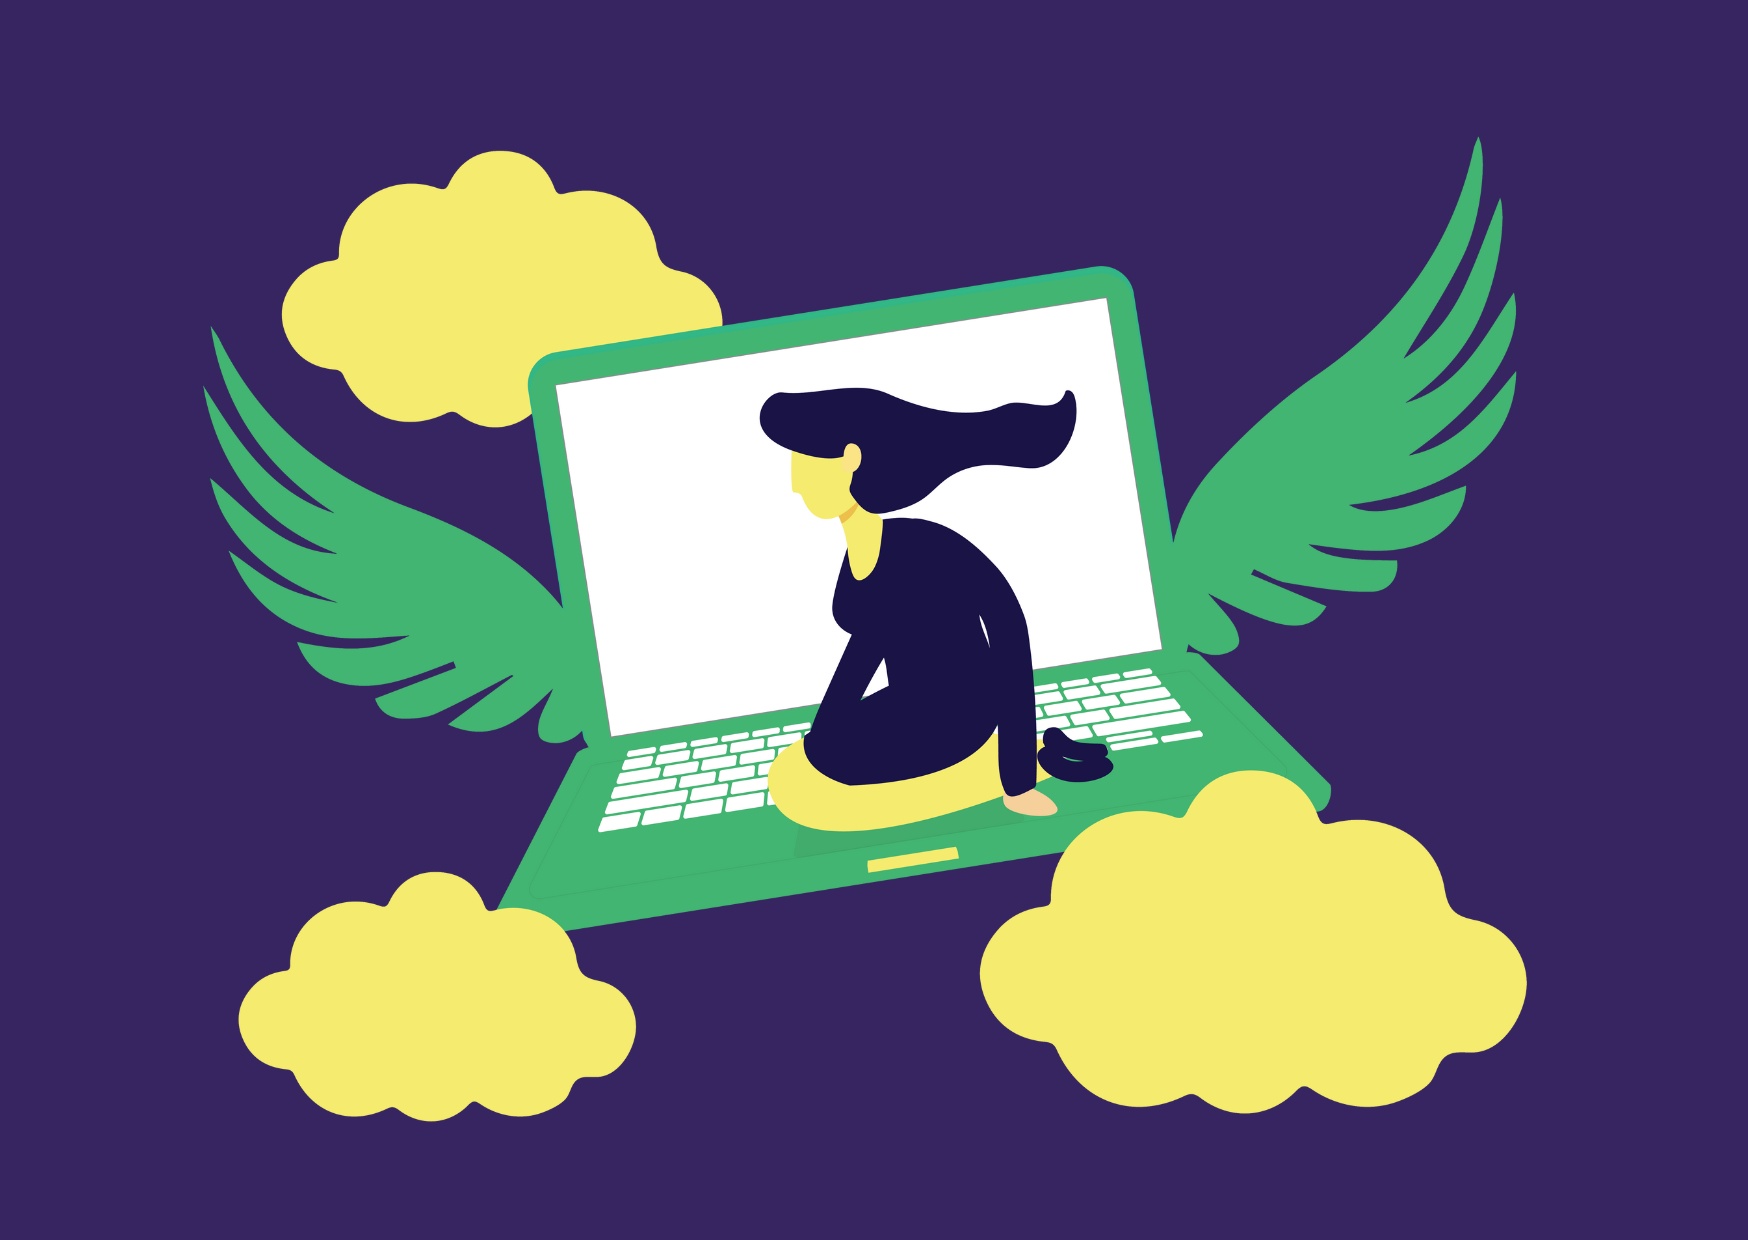 A vector image of of person sat on a laptop computer with wings, as if they're flying in the sky